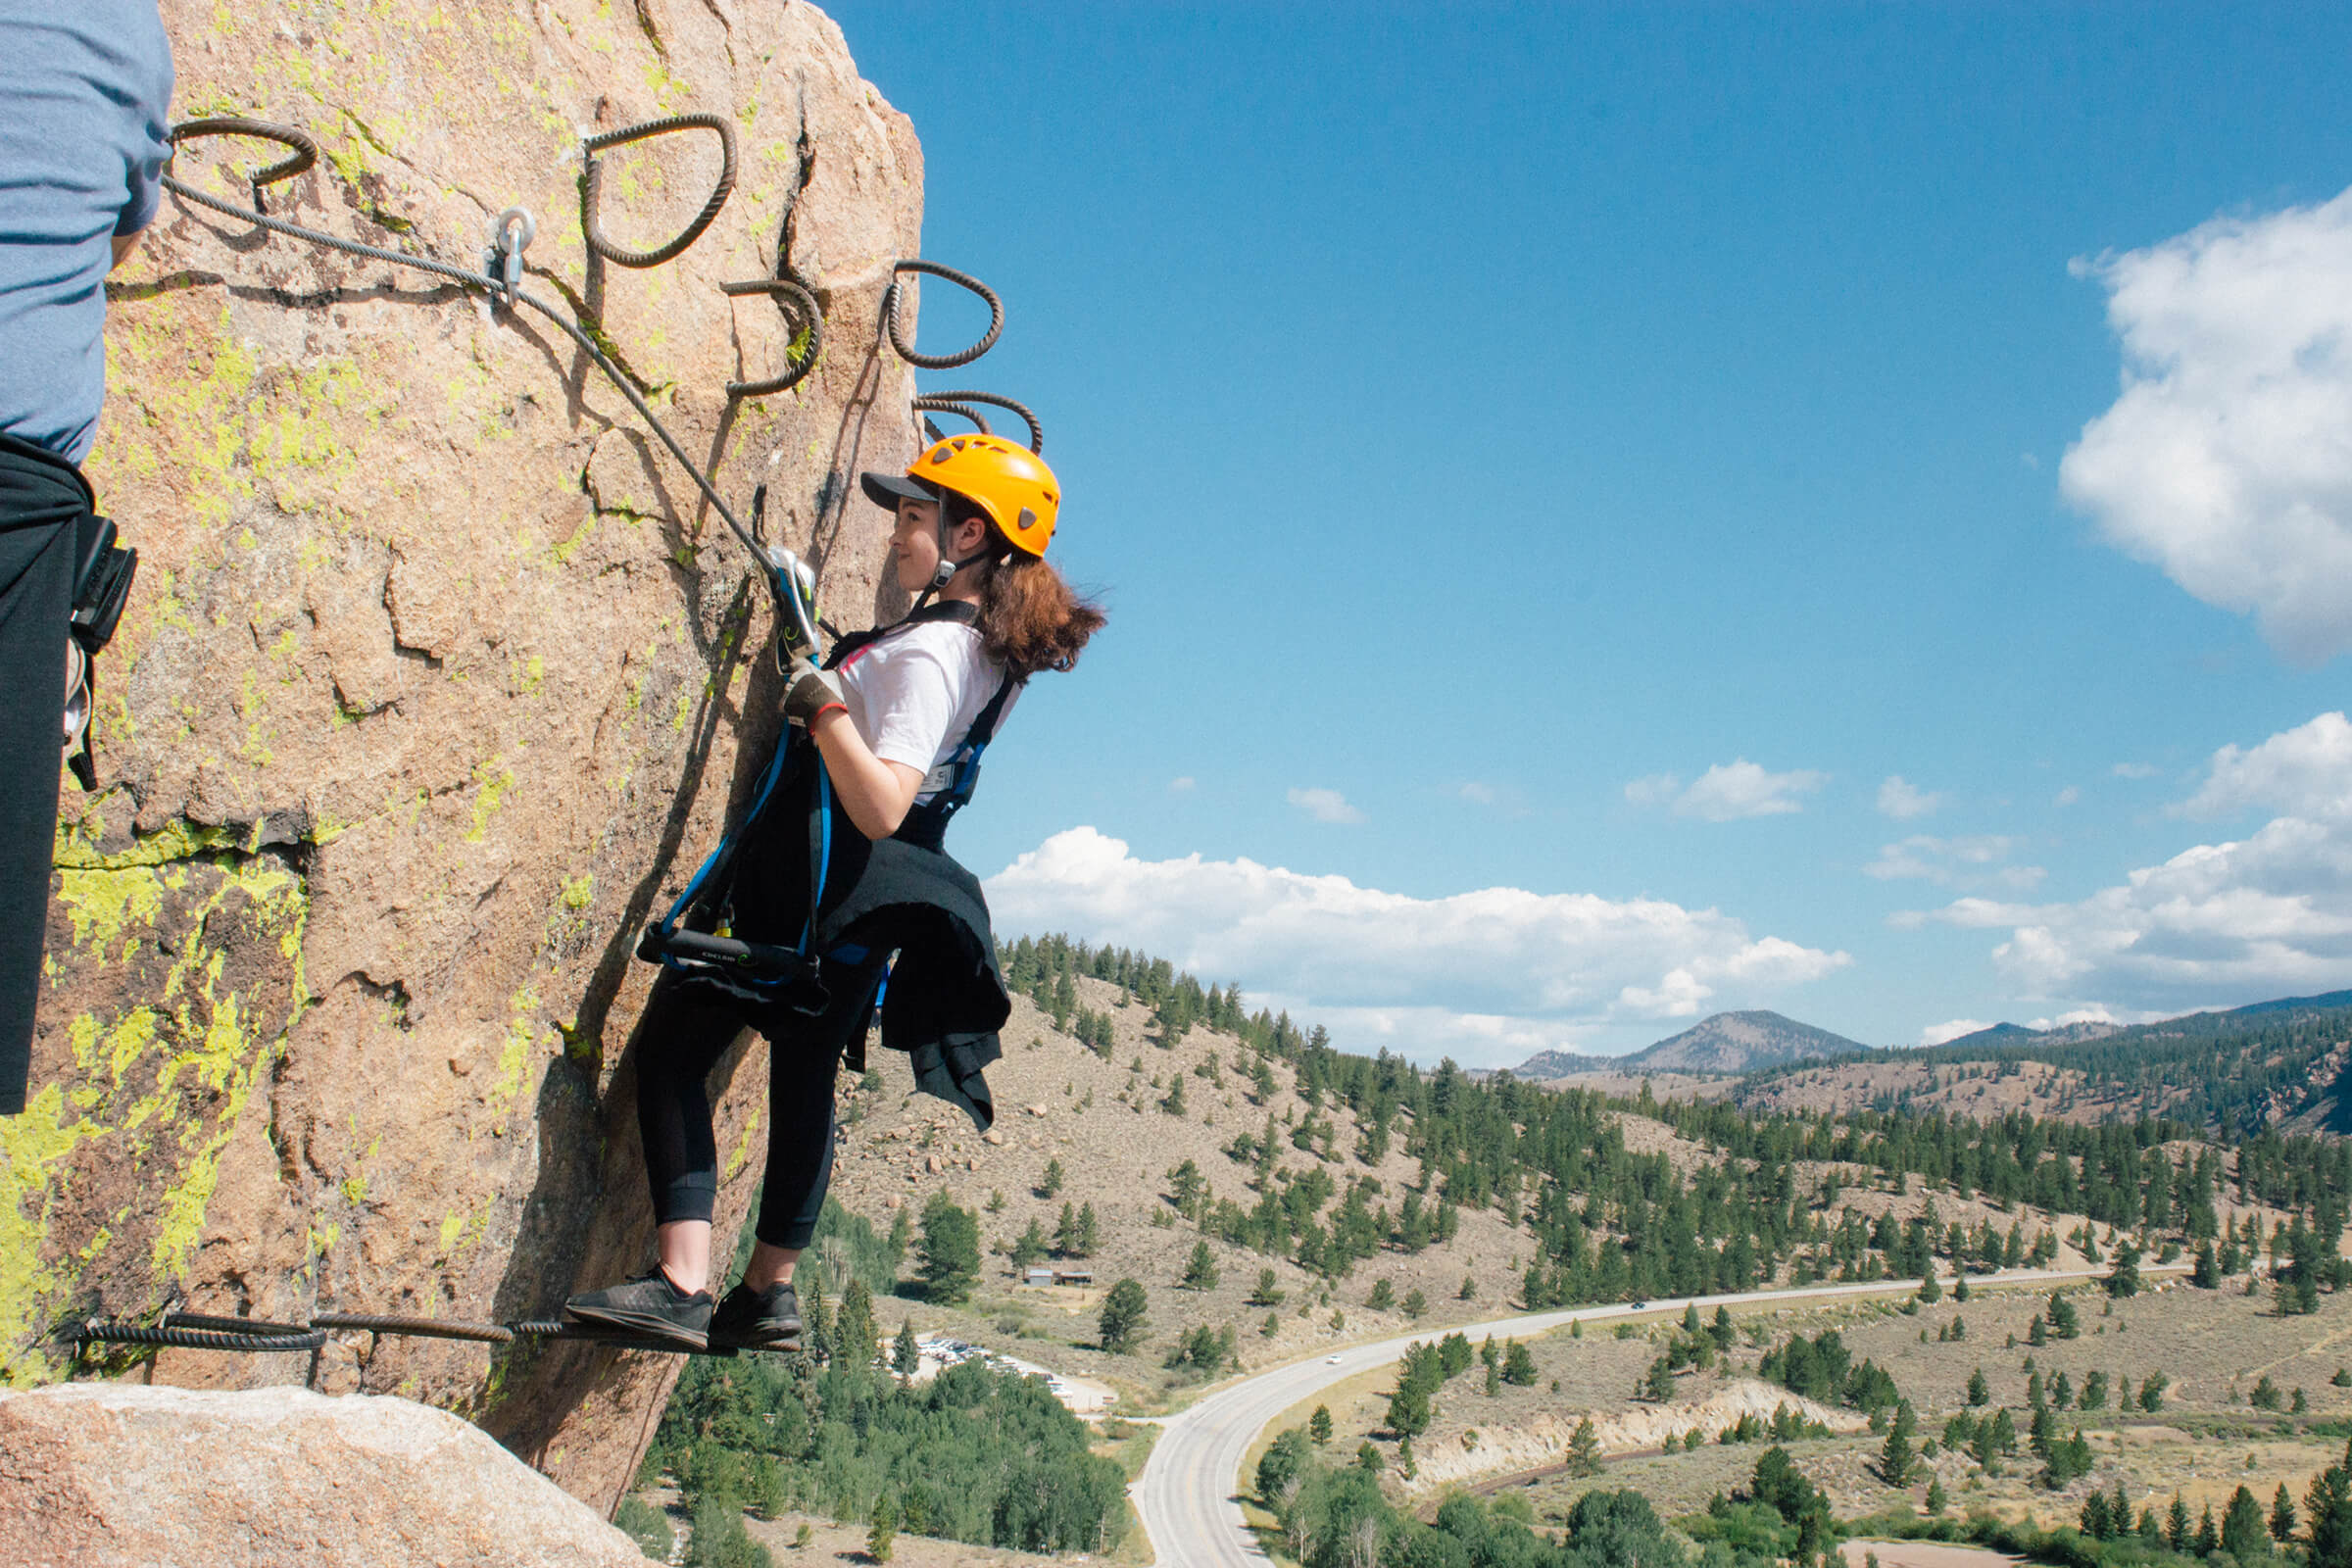 A woman in an orange helmet traversing across a rock face with a Colorado view in the background